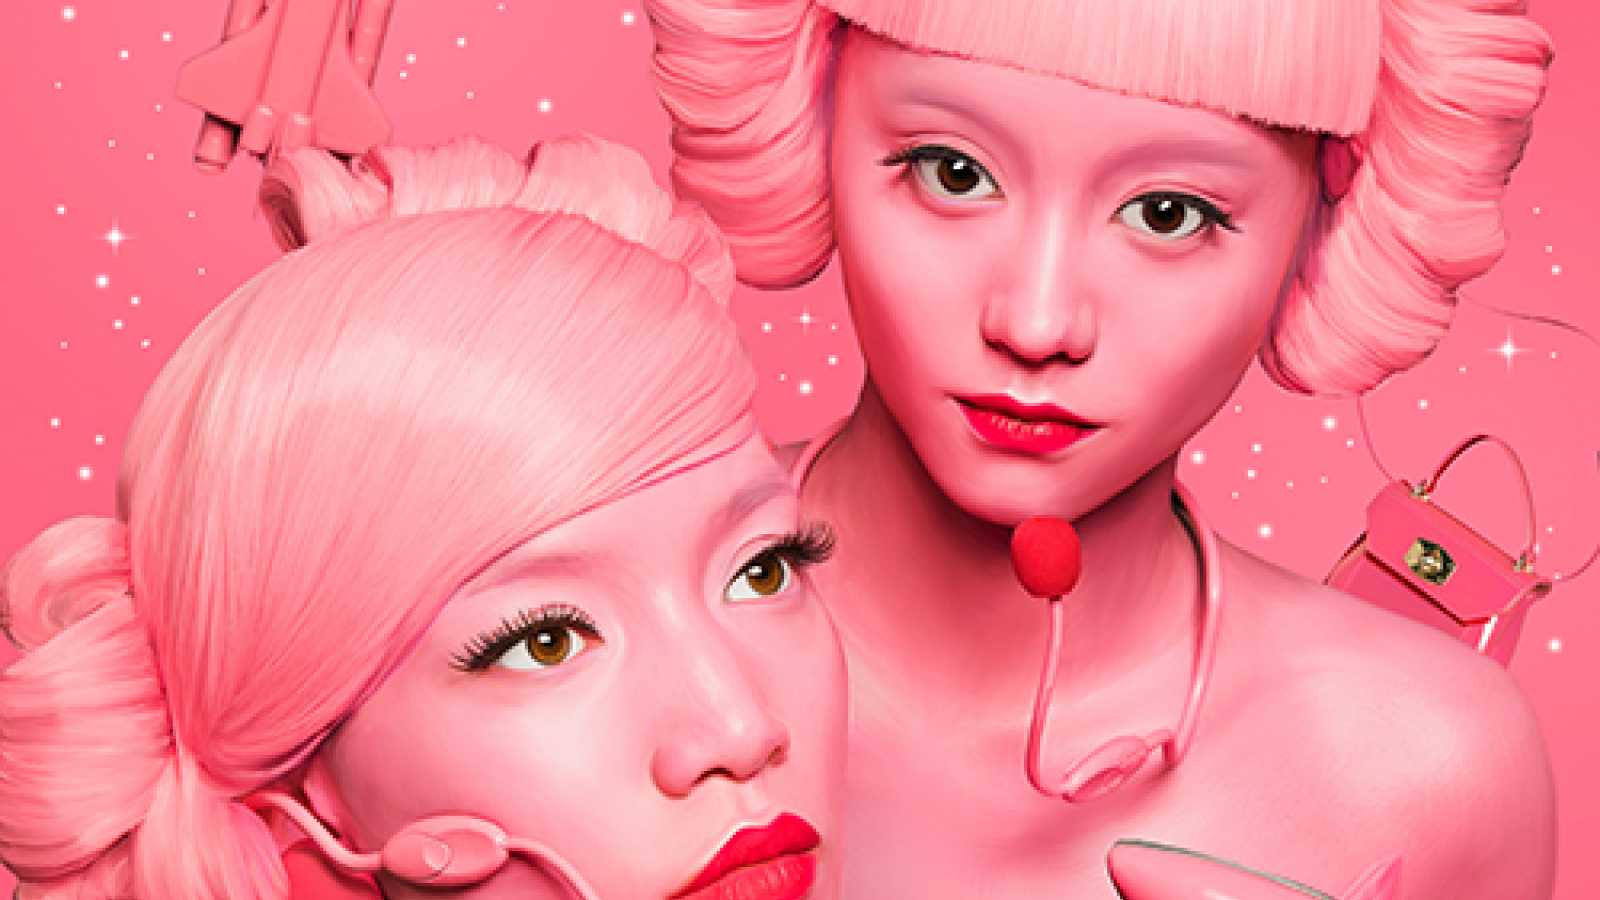 FEMM Features on Duke of Harajuku's First Album © FEMM. All rights reserved.